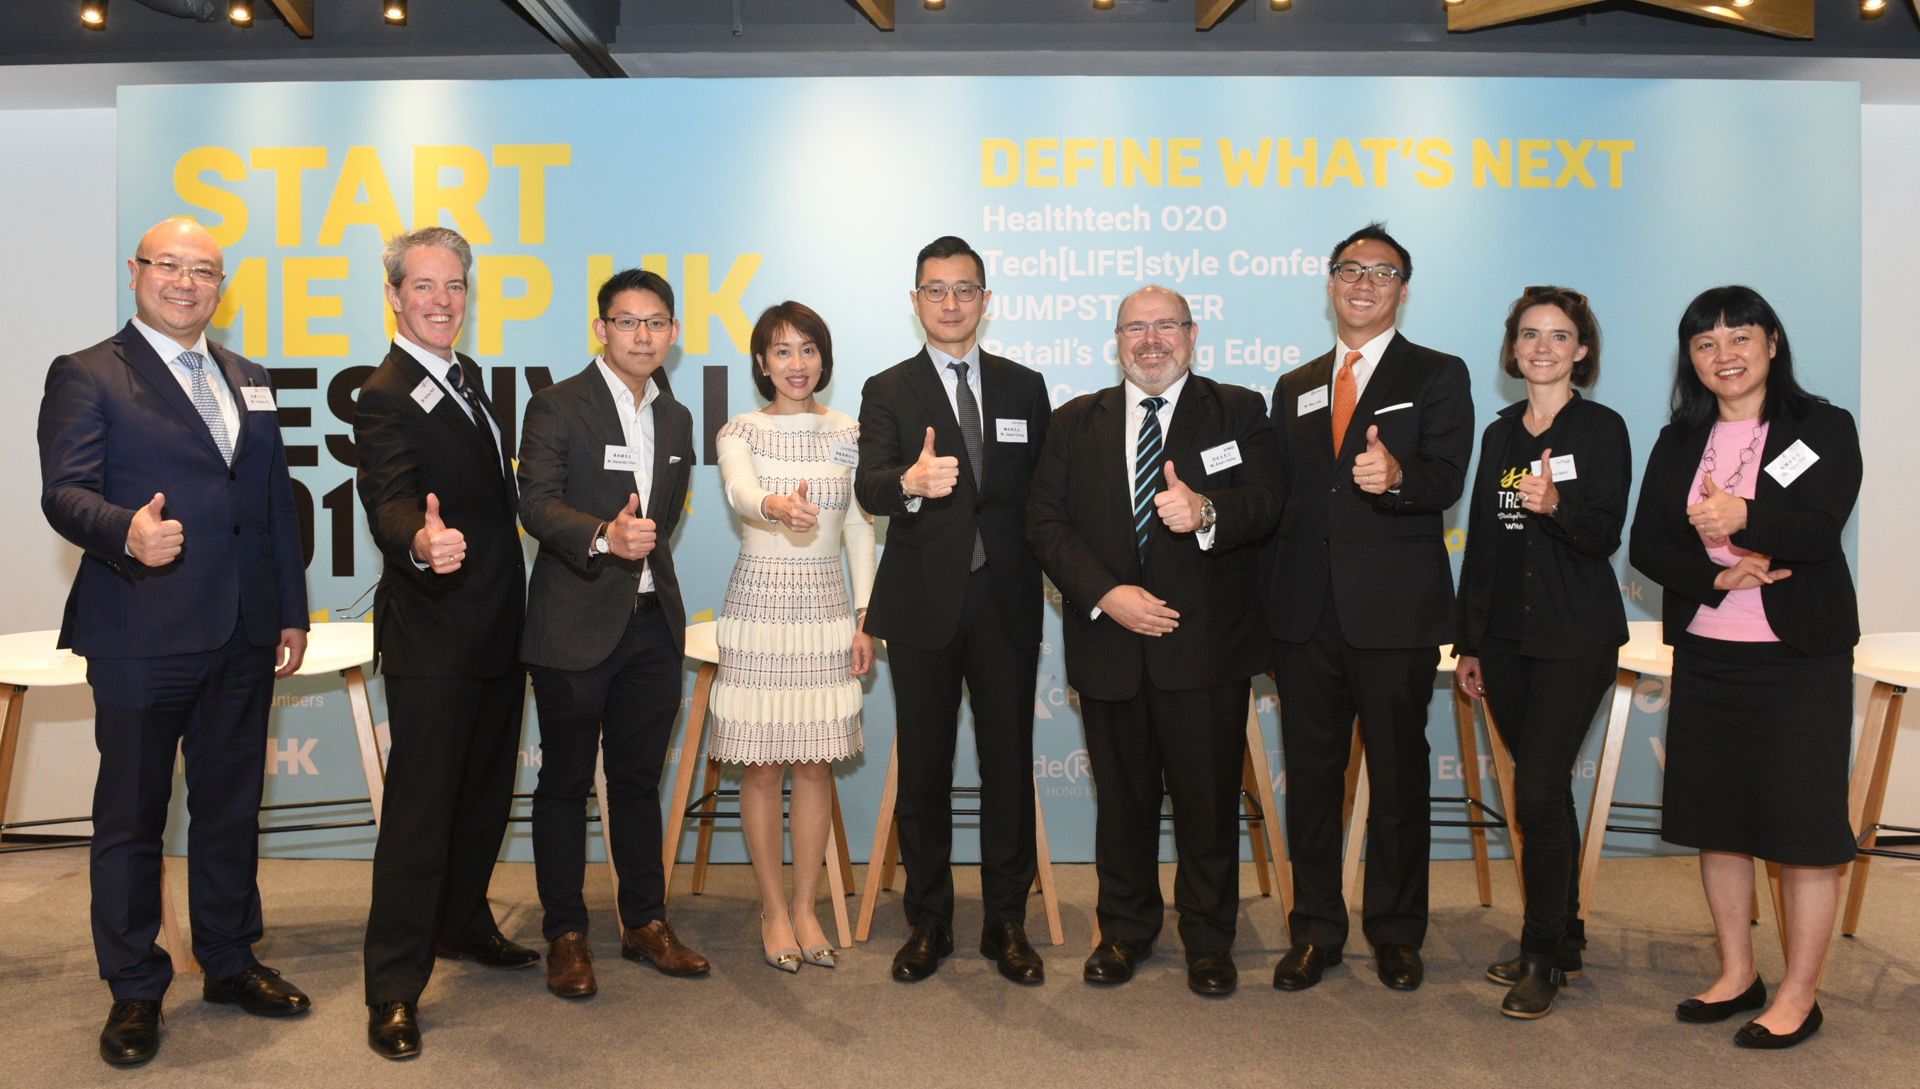 From left to right: Mr. Charles Ng (Associate Director-General of Investment Promotion, InvestHK), Mr. Andrew Work (Managing Director, Head of Asia and Europe, Media Division, NexChange), Mr. Alexander Chan (Co-director, The Mills Fabrica), Ms. Cindy Chow (Executive Director, Alibaba Entrepreneurs Fund), Mr. Jasper Chung (General Manager, Inside Retail Hong Kong), Mr. Anson Bailey (Partner, KPMG China), Mr. Mac Ling (APAC Ambassador, EdTech Asia), Ms. Karena Belin (CEO and Co-founder, WHub) and Ms. Jayne Chan (Head of StartmeupHK, InvestHK) join hands to announce the details of StartmeupHK Festival 2019.